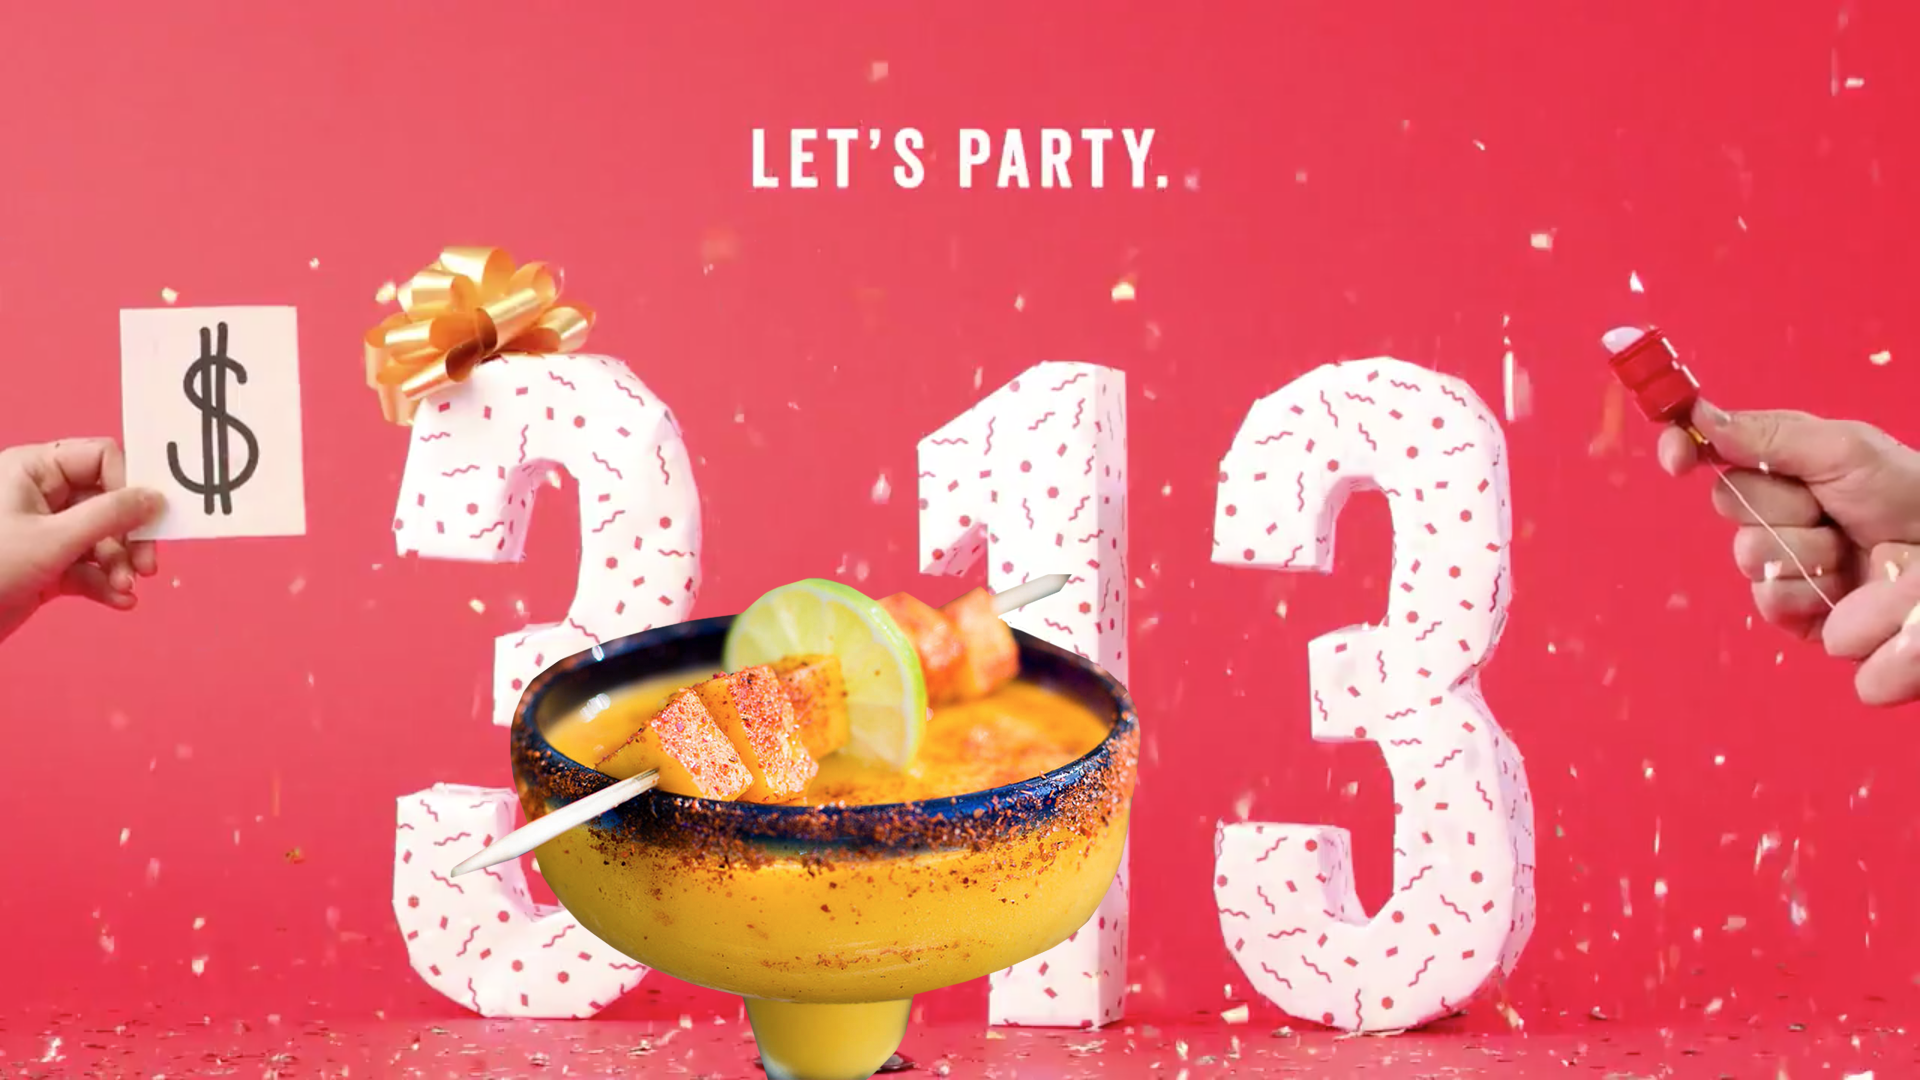 Chili's offers $3.13 margaritas to celebrate its March 13 birthday